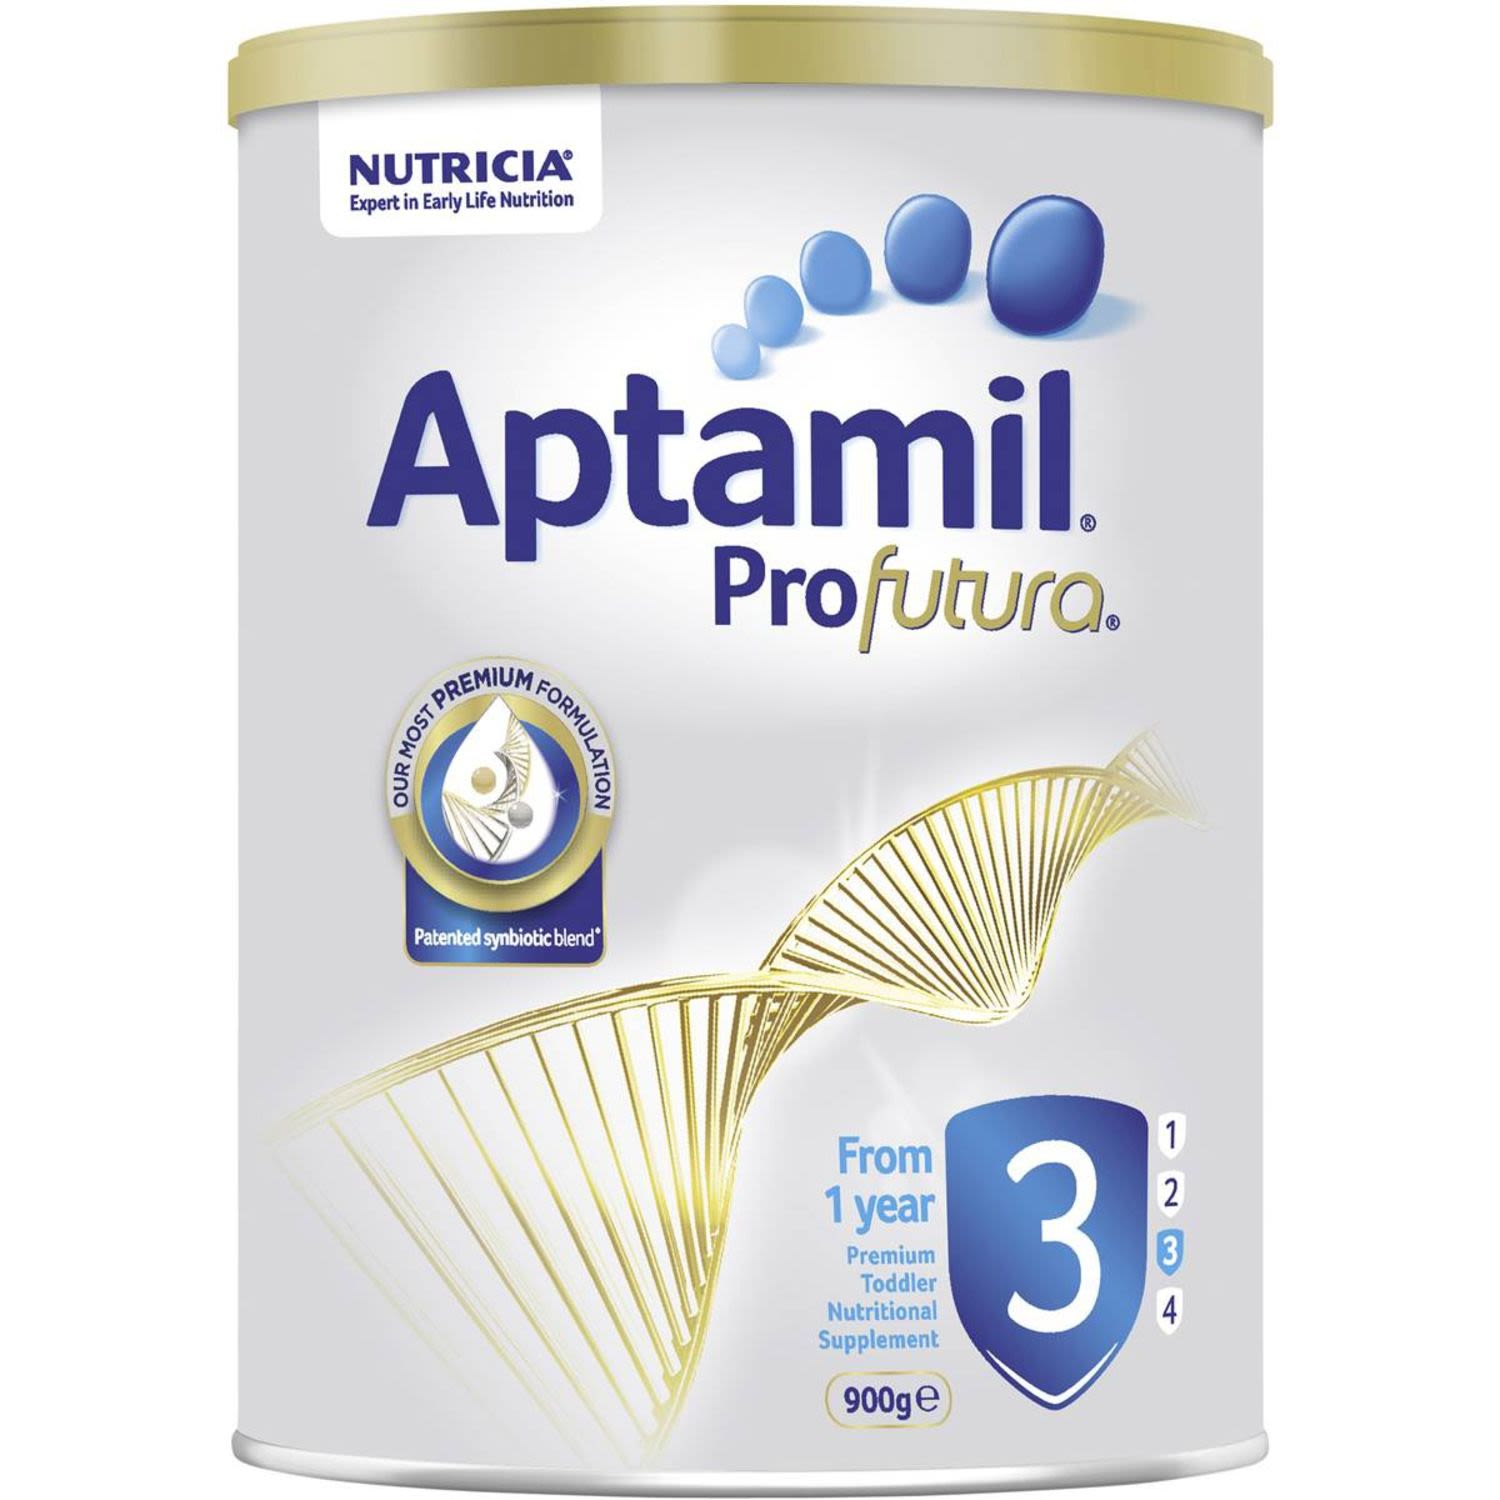 Aptamil Profutura Stage 3 is our most Premium Nutritional Supplement for toddlers from 1 year. With over 40 years of continuous scientific research, our formulations are developed to support your toddler's progress.

Backed by 40 years of Nutricia’s pioneering research
Uniquely developed in combination with patented synbiotic blend
Contains a unique probiotic Bifidobacterium breve
Increased Omega 3 DHA level*
Zinc, necessary for immune system function^
Iron, iodine and zinc to contribute to normal cognitive function^
Suitable for toddlers from 1 year whose nutritional intake may be inadequate
900g tin format

^When consumed as part of a healthy varied diet and prepared as directed.
*Compared to previous formulation. <br /> <br /><br /> <br />Allergen may be present: Fish|Milk|Soy